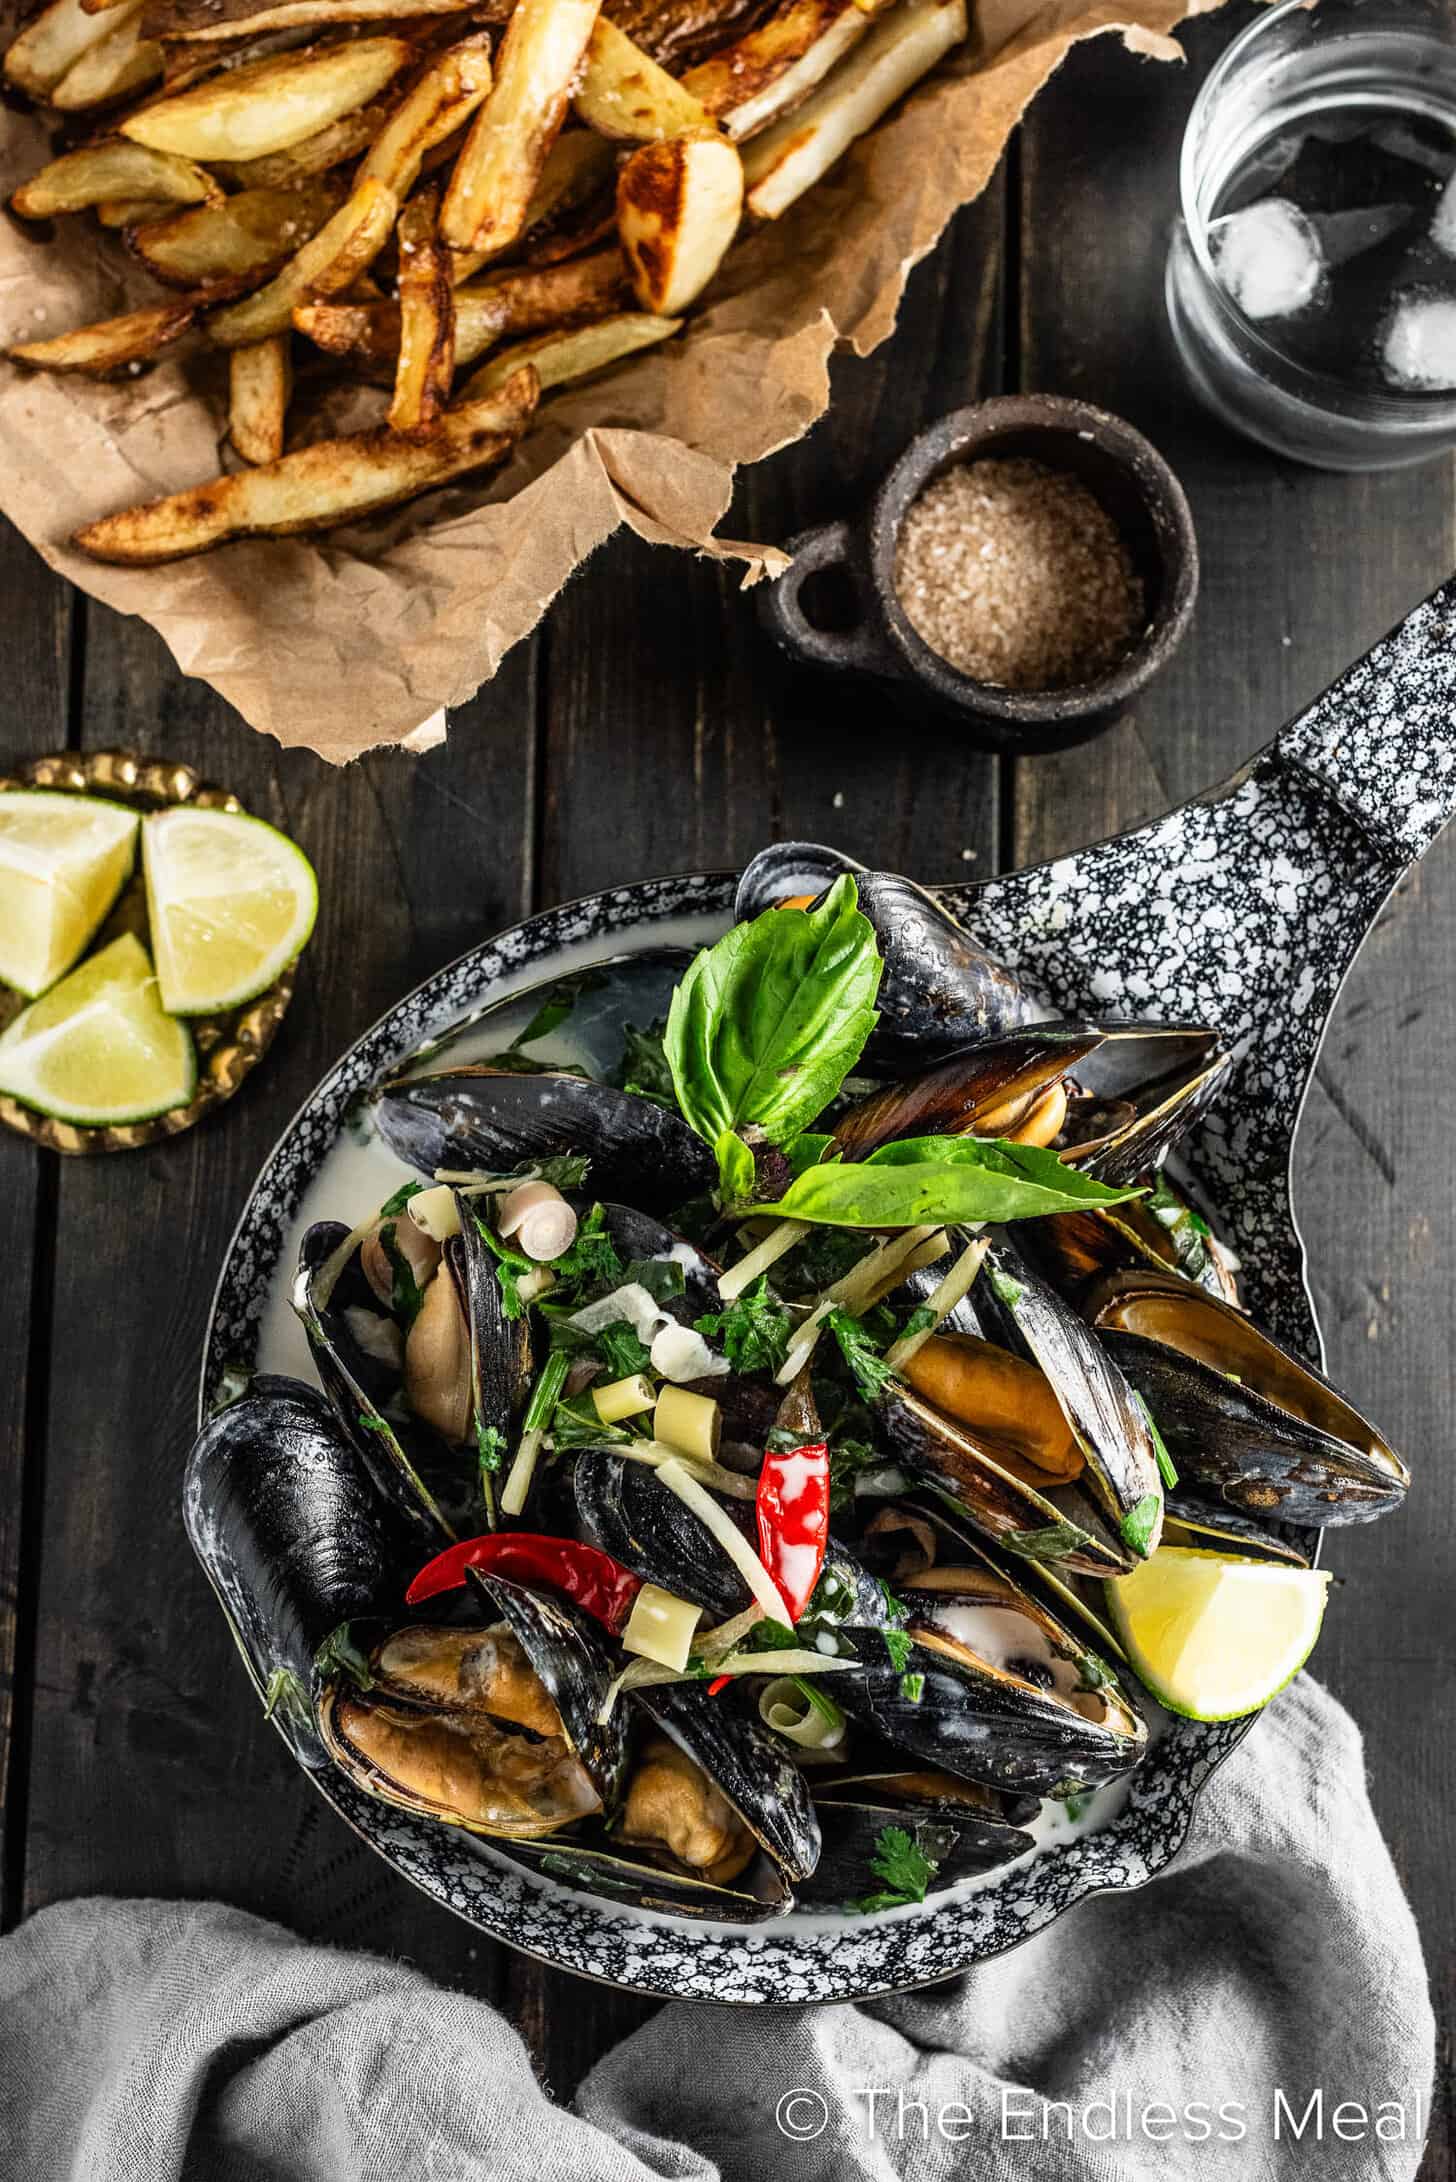 Thai Mussels cooked in coconut milk